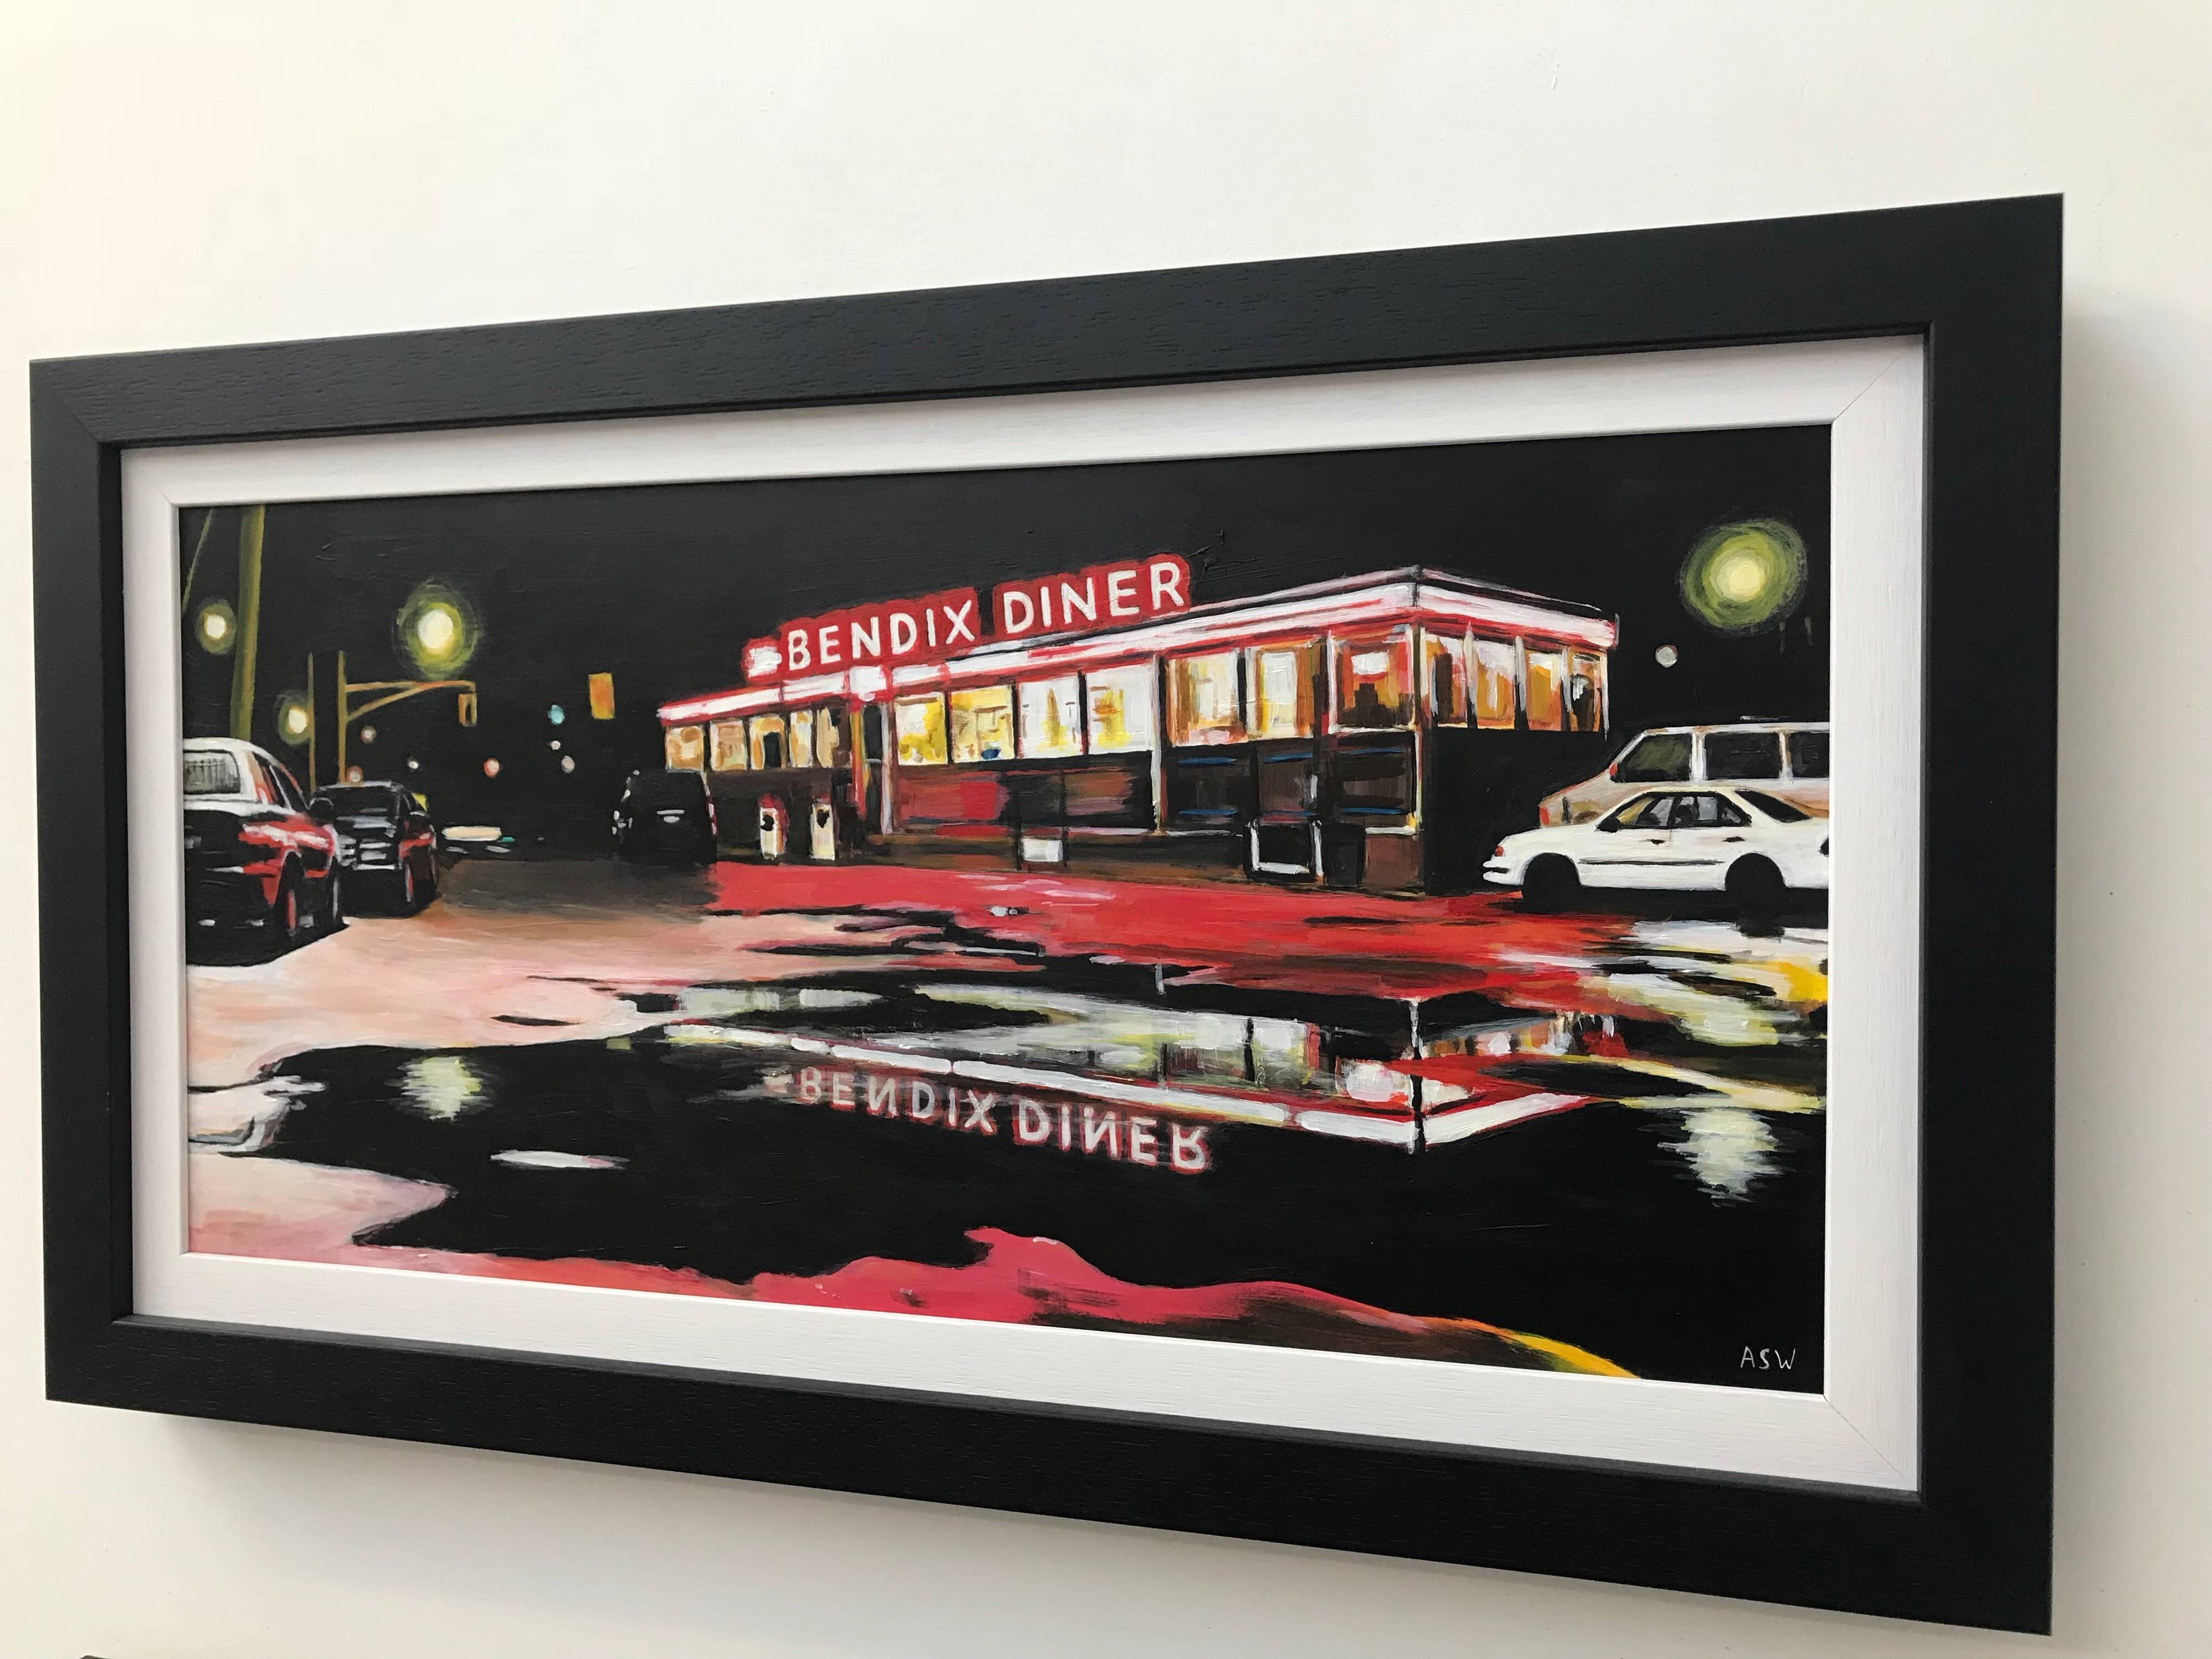 'Bendix Diner' in New Jersey is an American Diner Painting by Leading British Urban Landscape Artist Angela Wakefield, forming part of her Americana Series. Angela is often favourably compared to Edward Hopper, especially with her paintings of